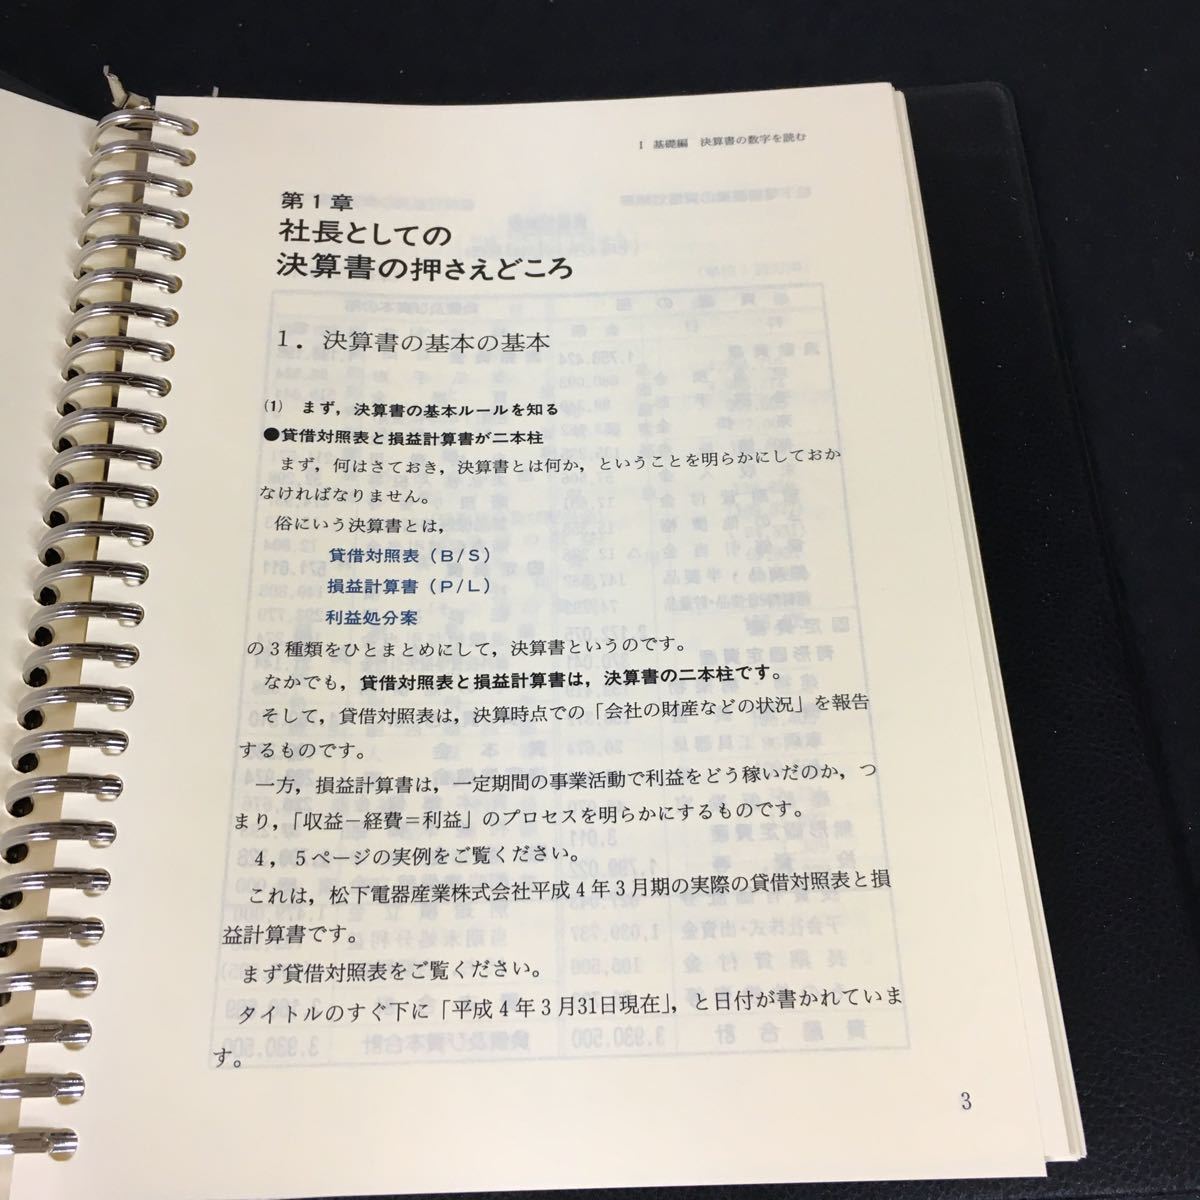 a-321 company length therefore. settlement of accounts paper. reading person author /.. west ... Japan management . Rika association publish department 1996 year modified . no. 8 version issue *1